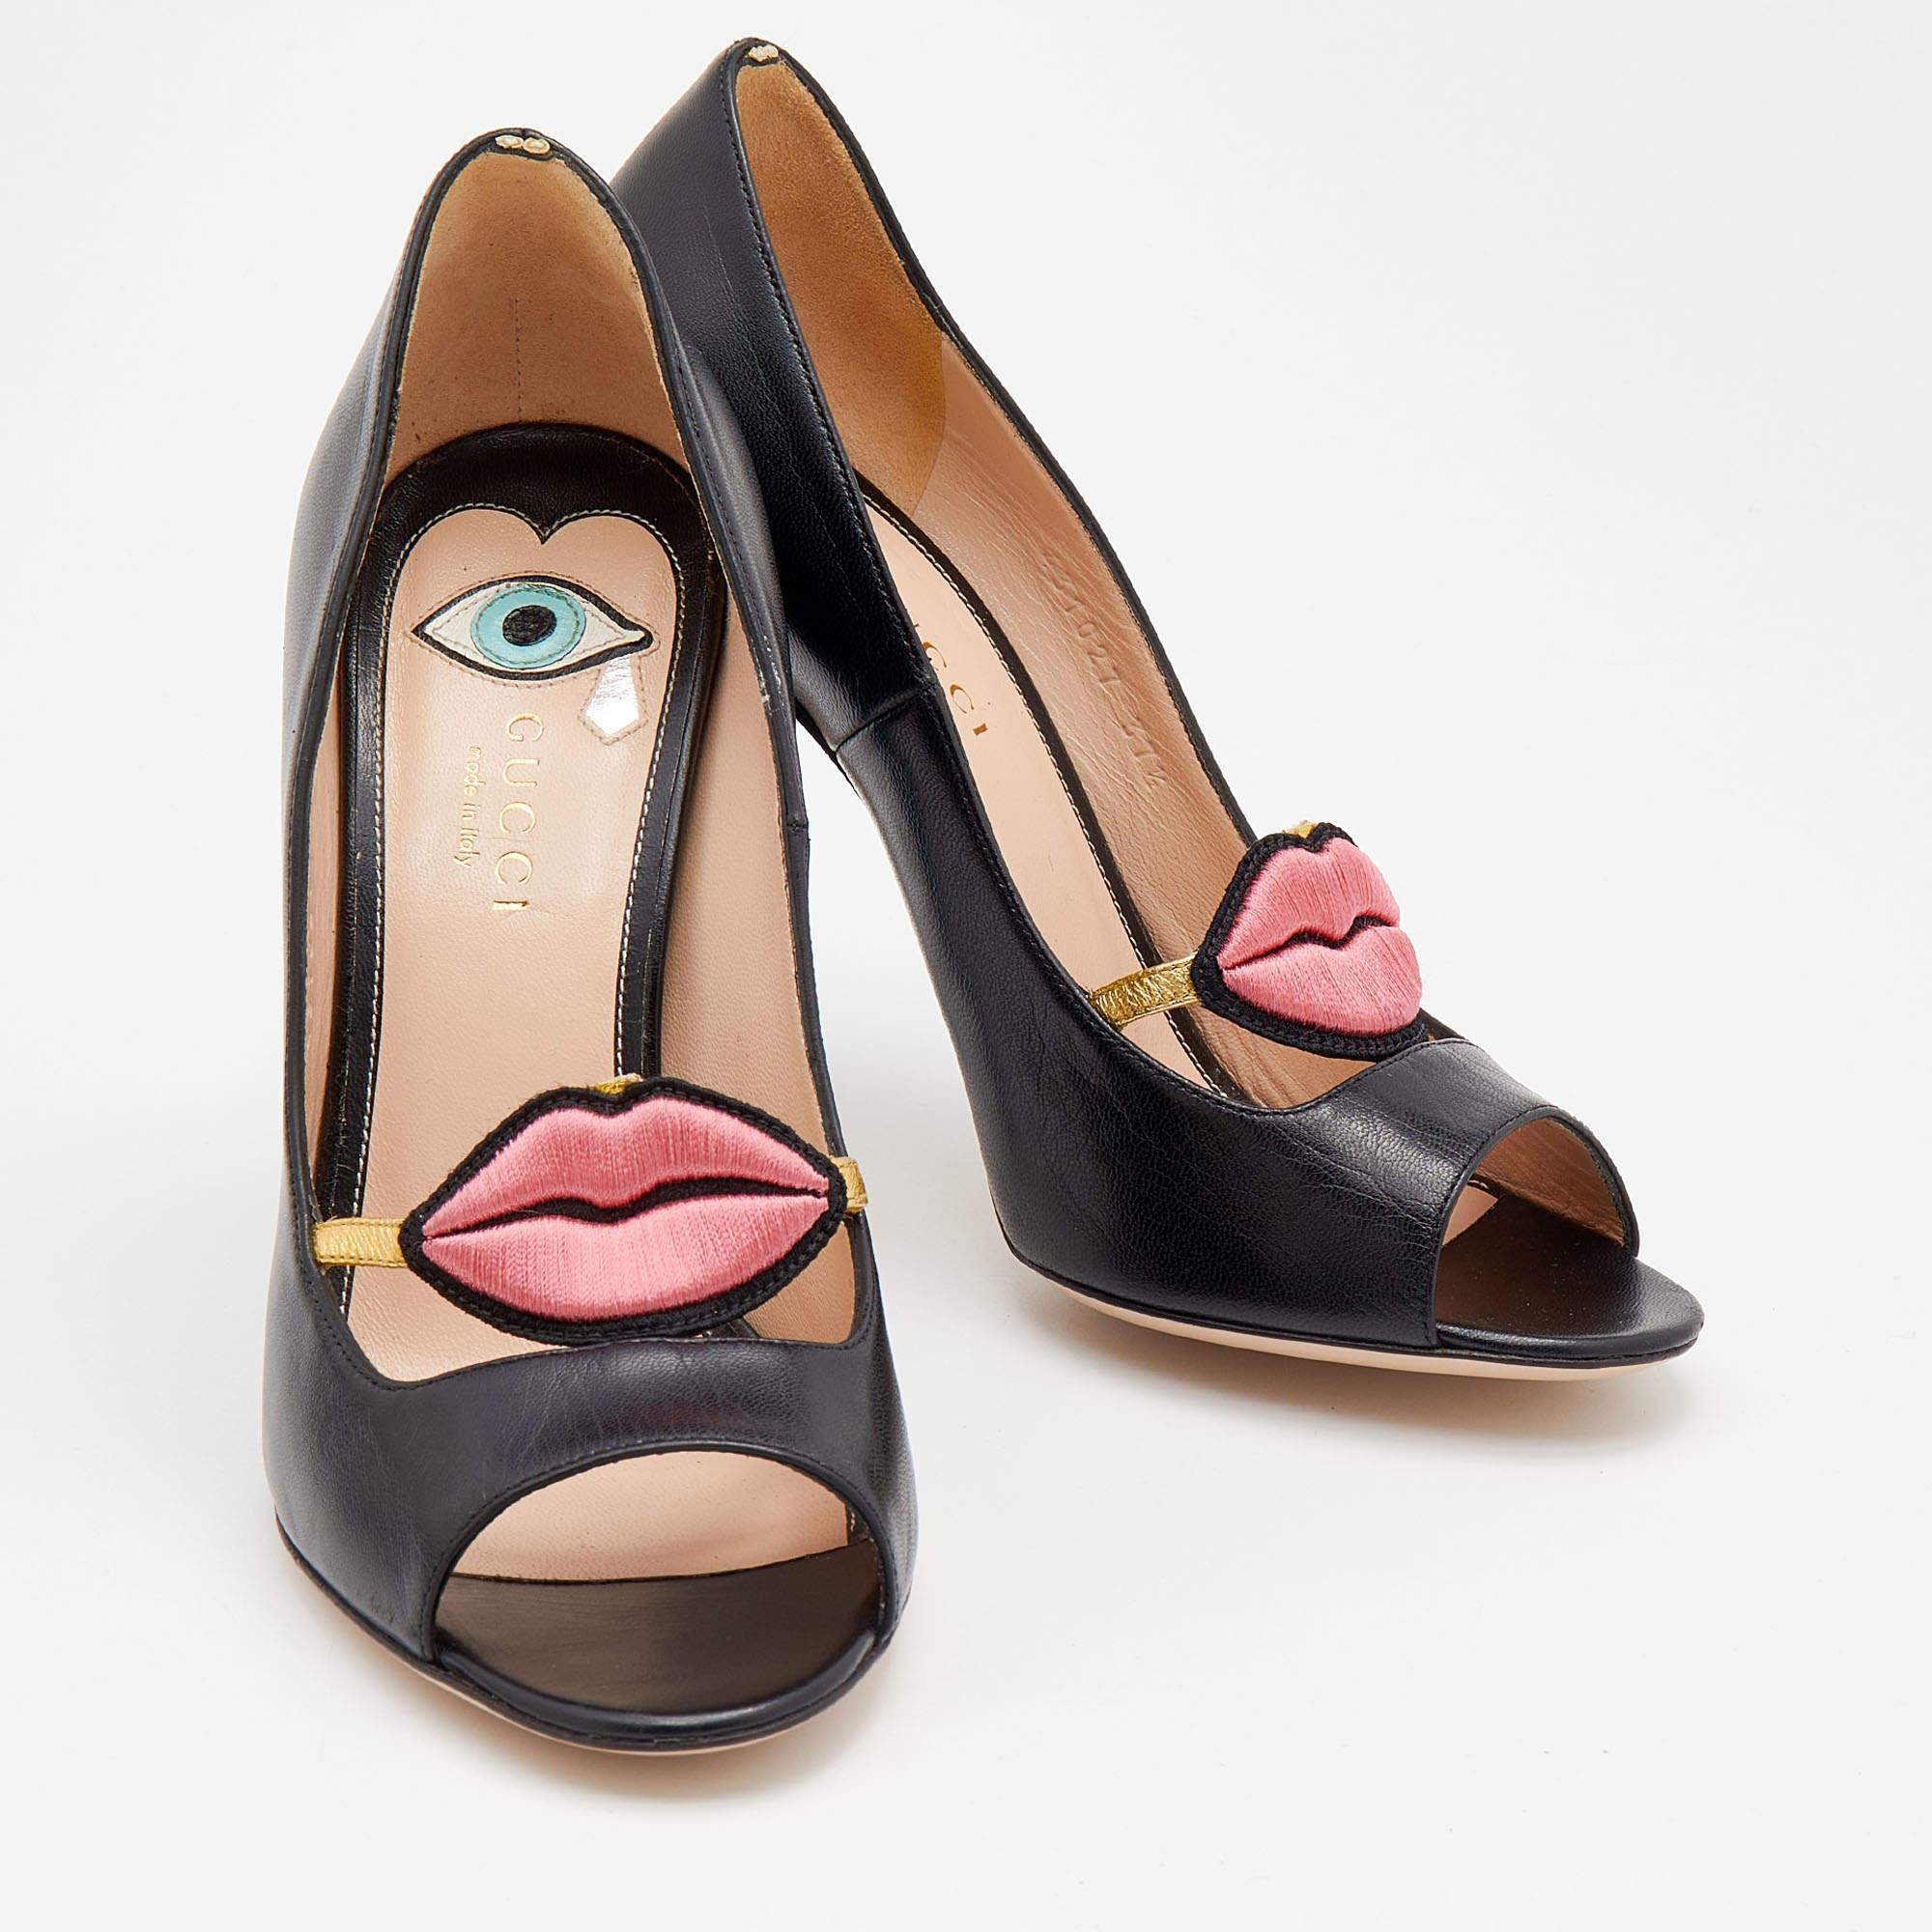 The playful and striking characteristics of this pair of Gucci pumps will make it a standout piece in your closet. Created from leather, it is made attractive with a lips motif on the front and an eye-like design on the insoles. The 11cm heels of